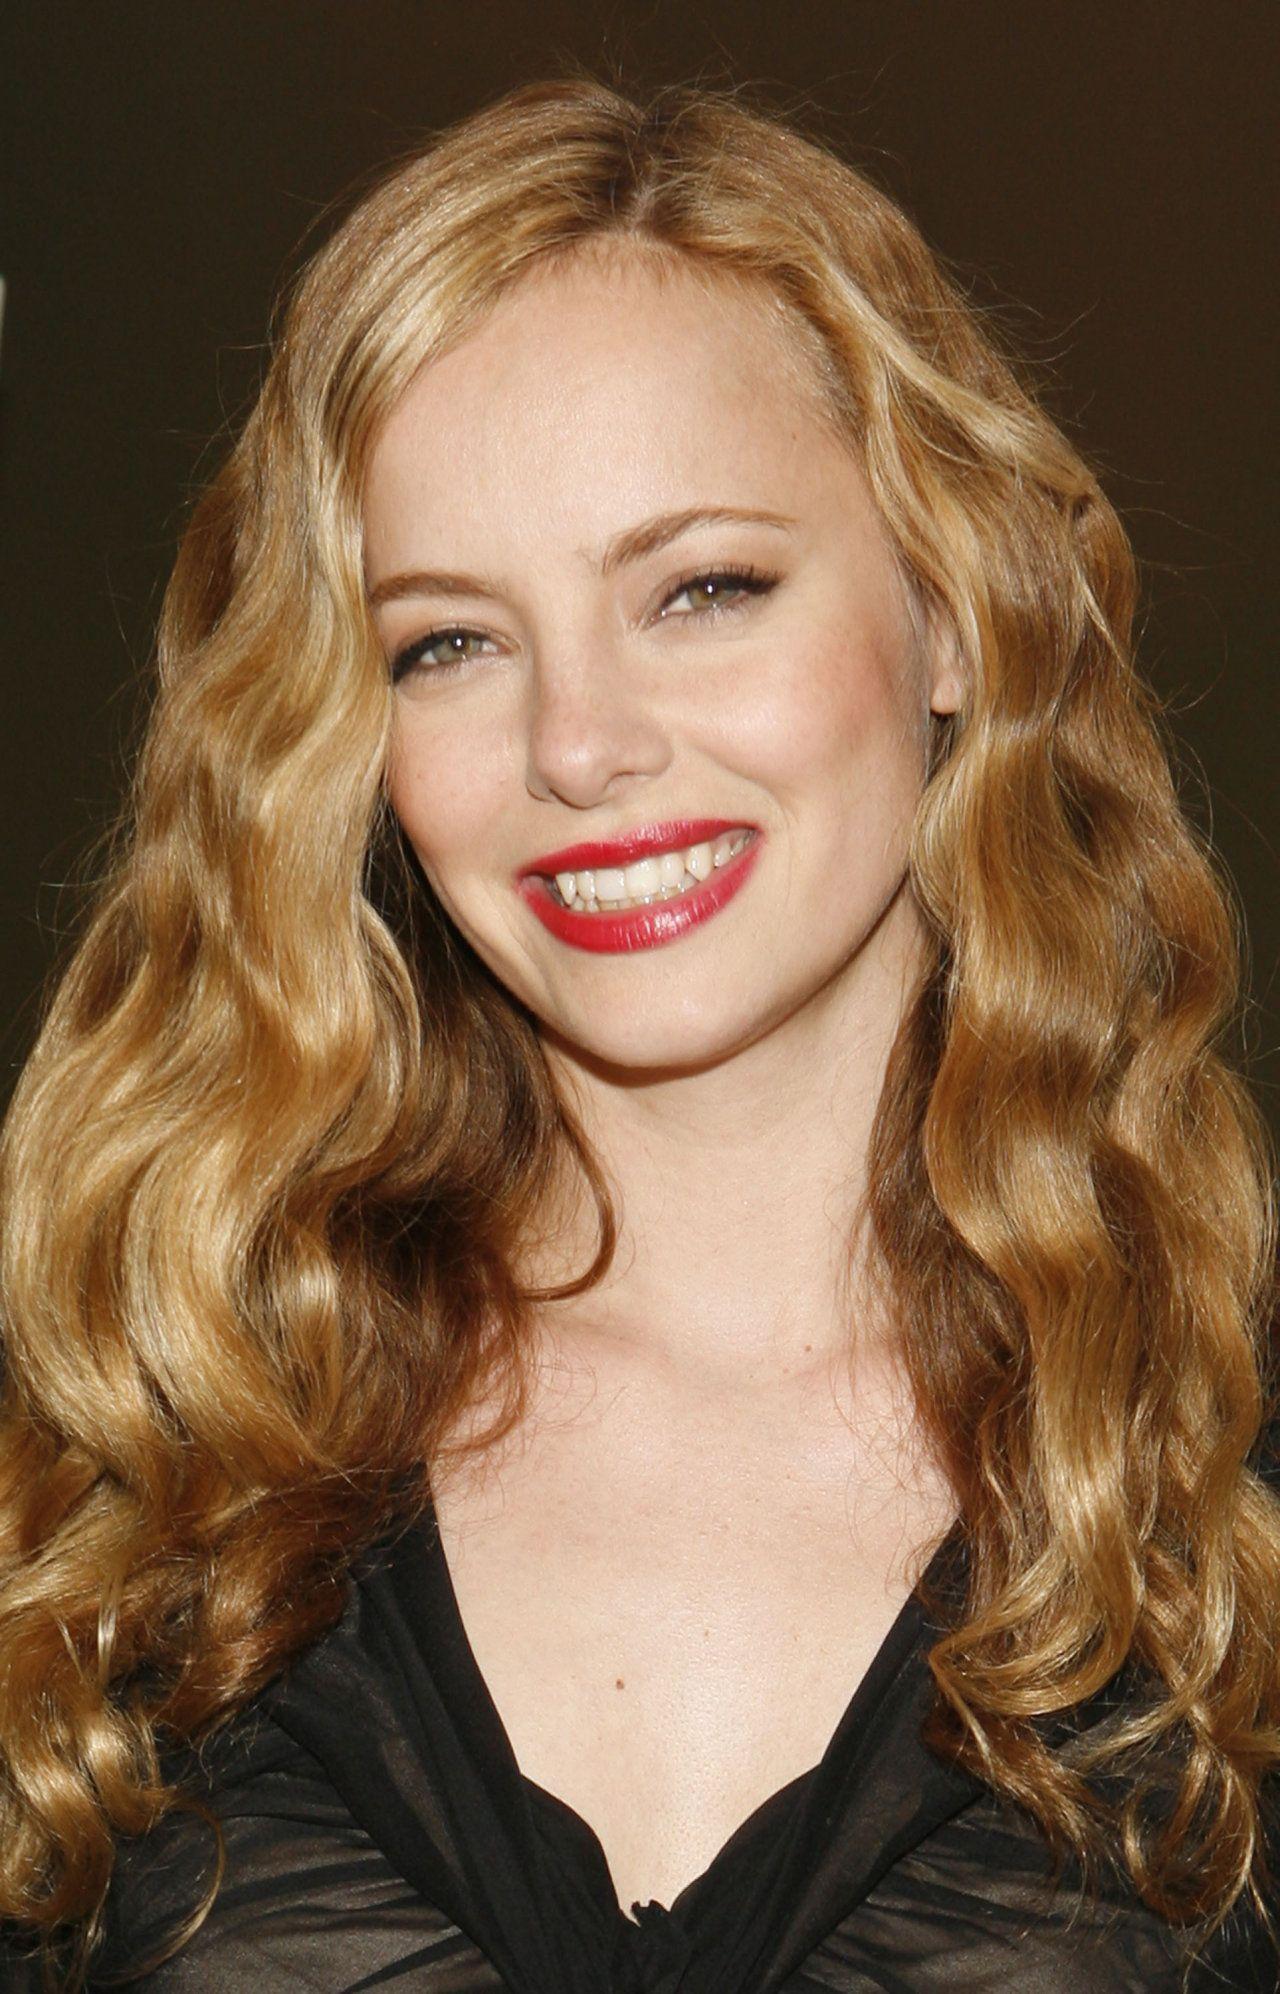 bijou phillips Image, Graphics, Comments and Picture